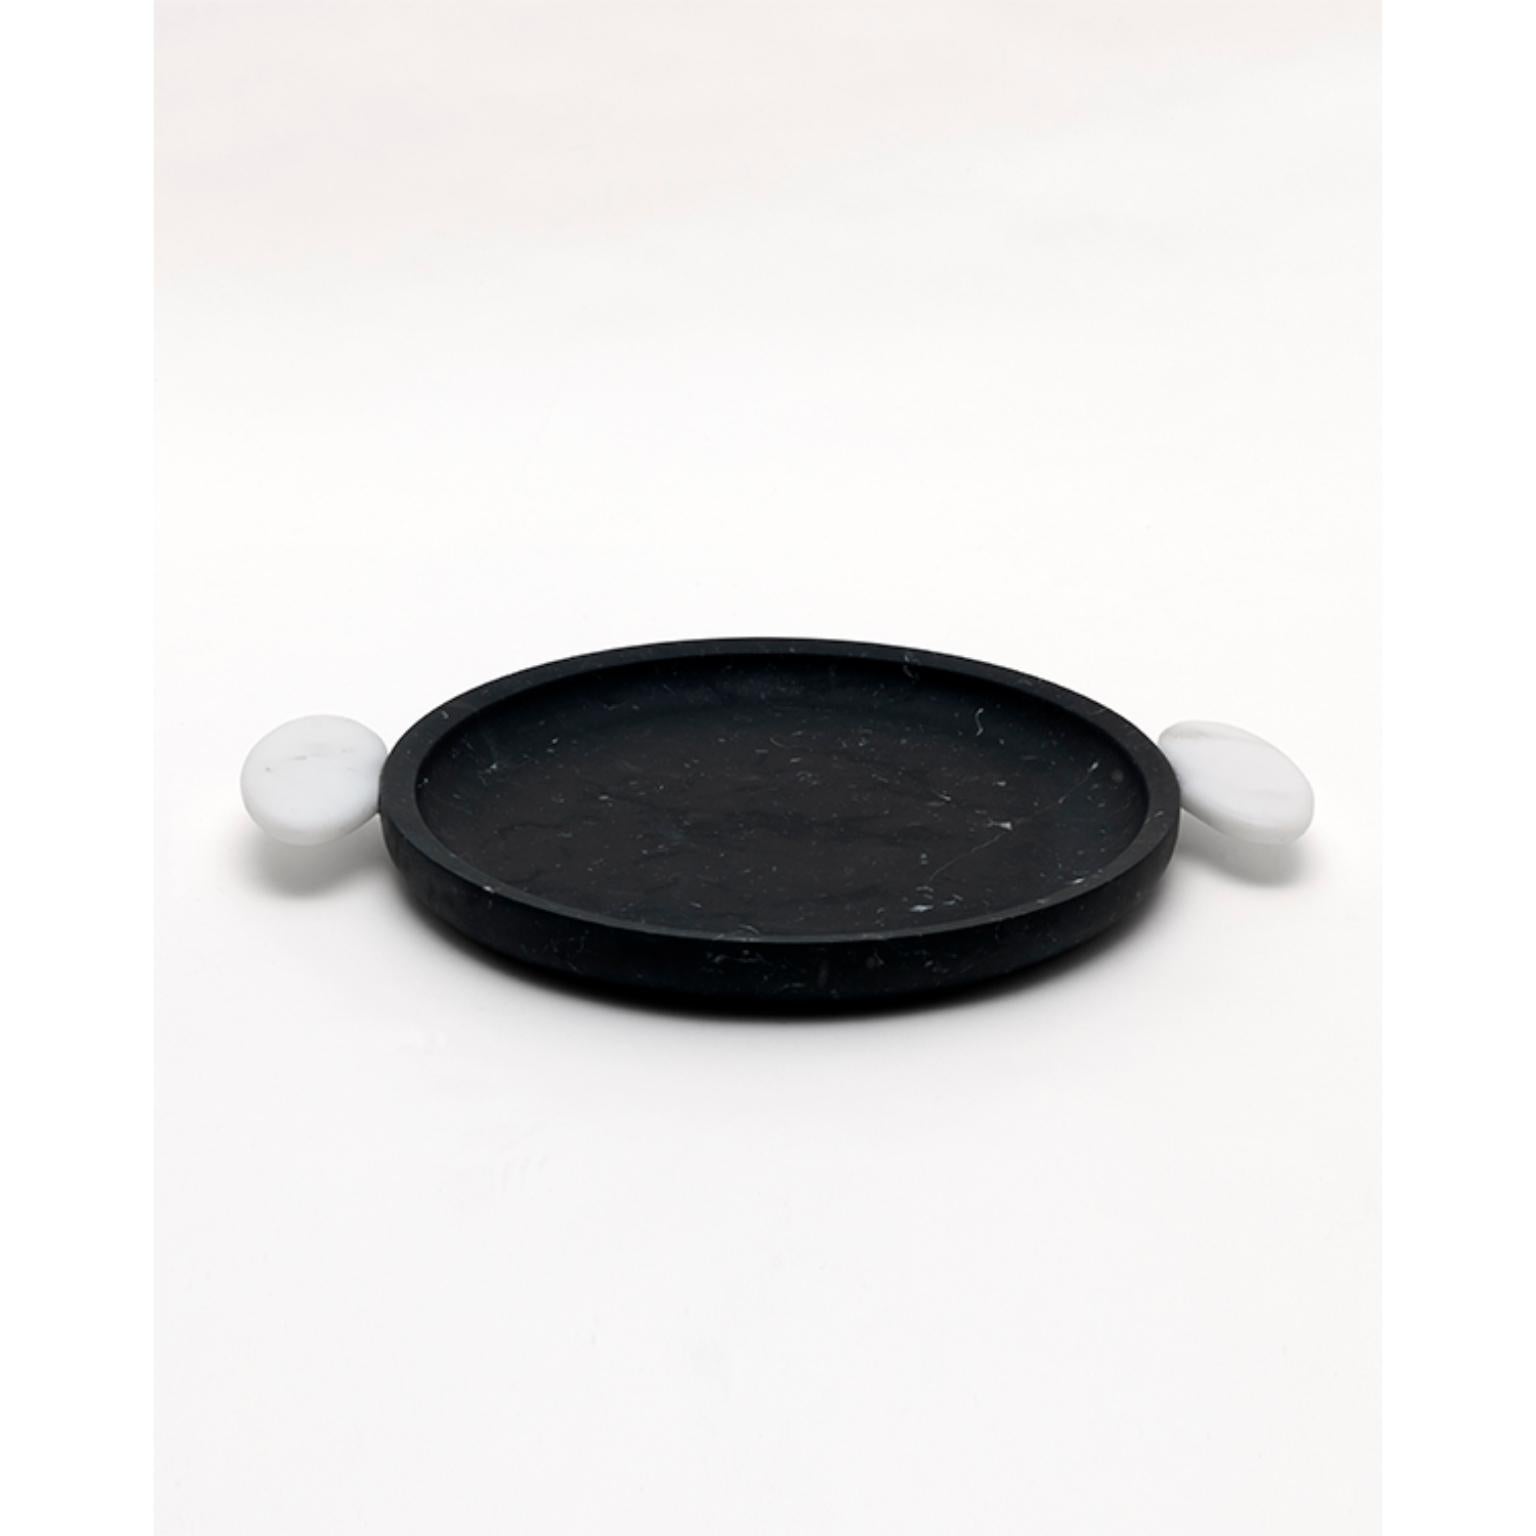 Danese marble tray Matteo Cibic
Dimensions: 40.7 x 30 x 4 cm
Materials: Nero Marquinia, Bianco Michelangelo

Please note that the Cibic pieces with “ears” or tray handles are ornamental and not functional. 
Use them can cause breaks and is